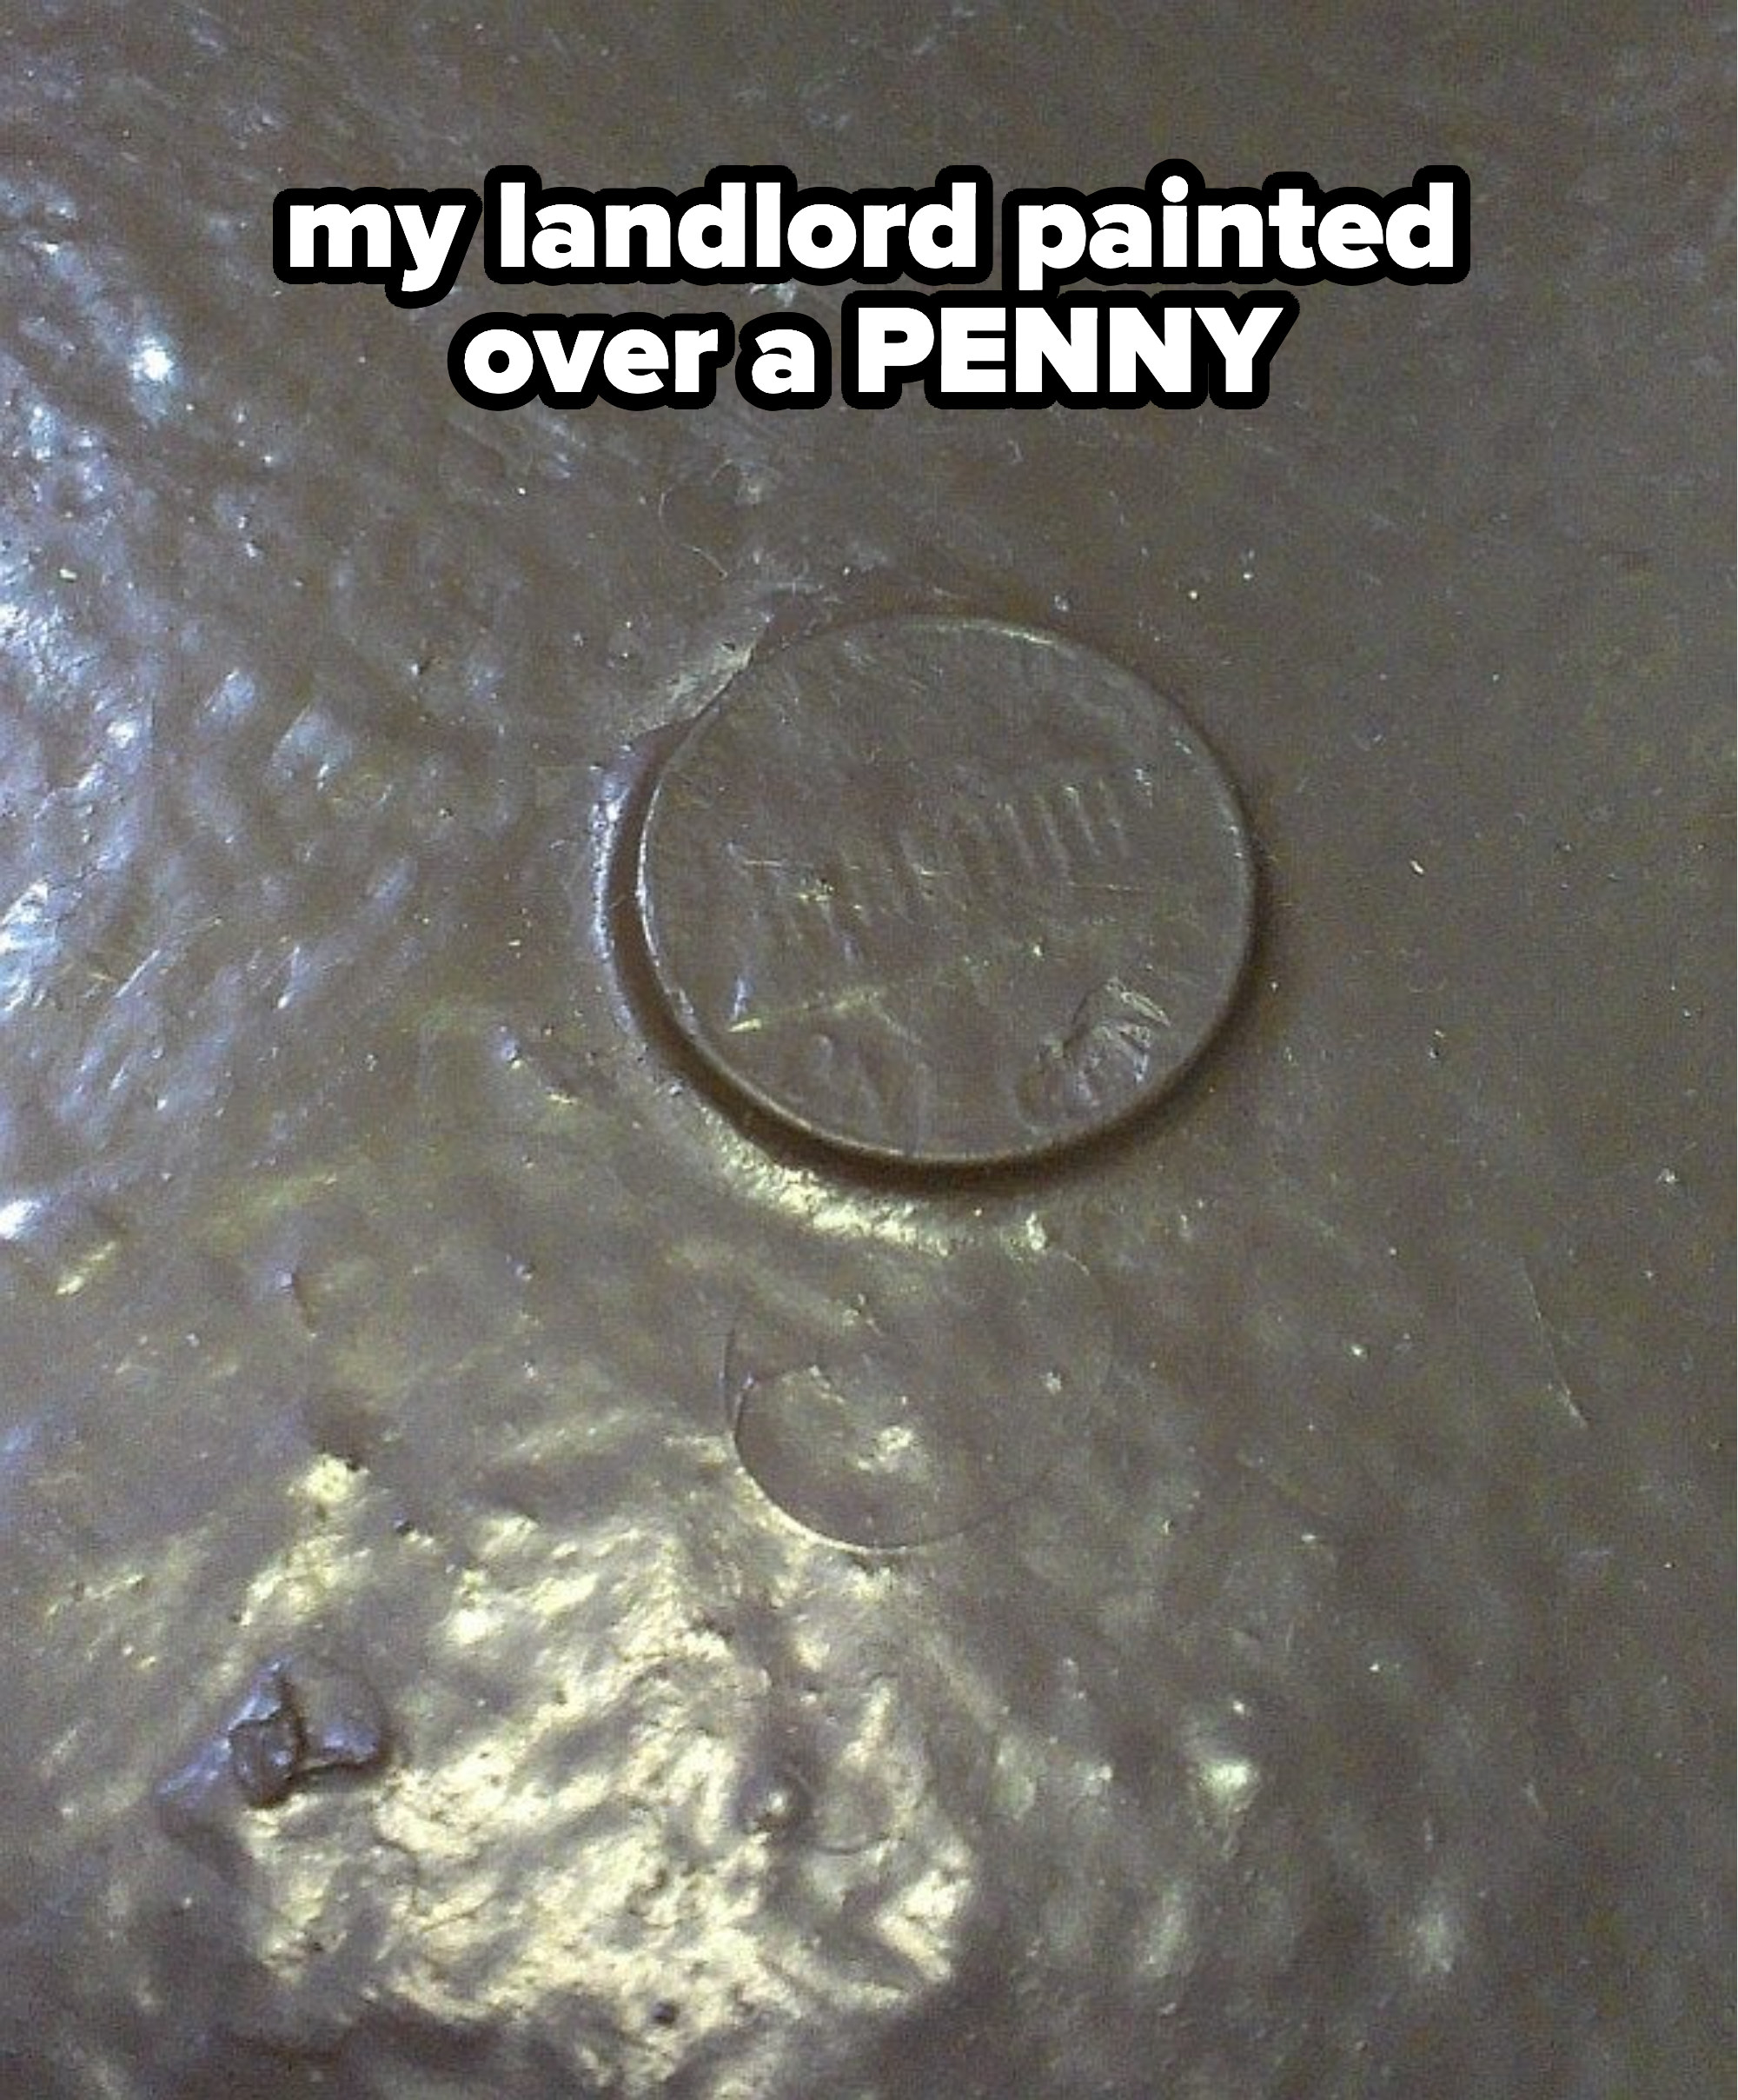 penny that has been painted over by a landlord